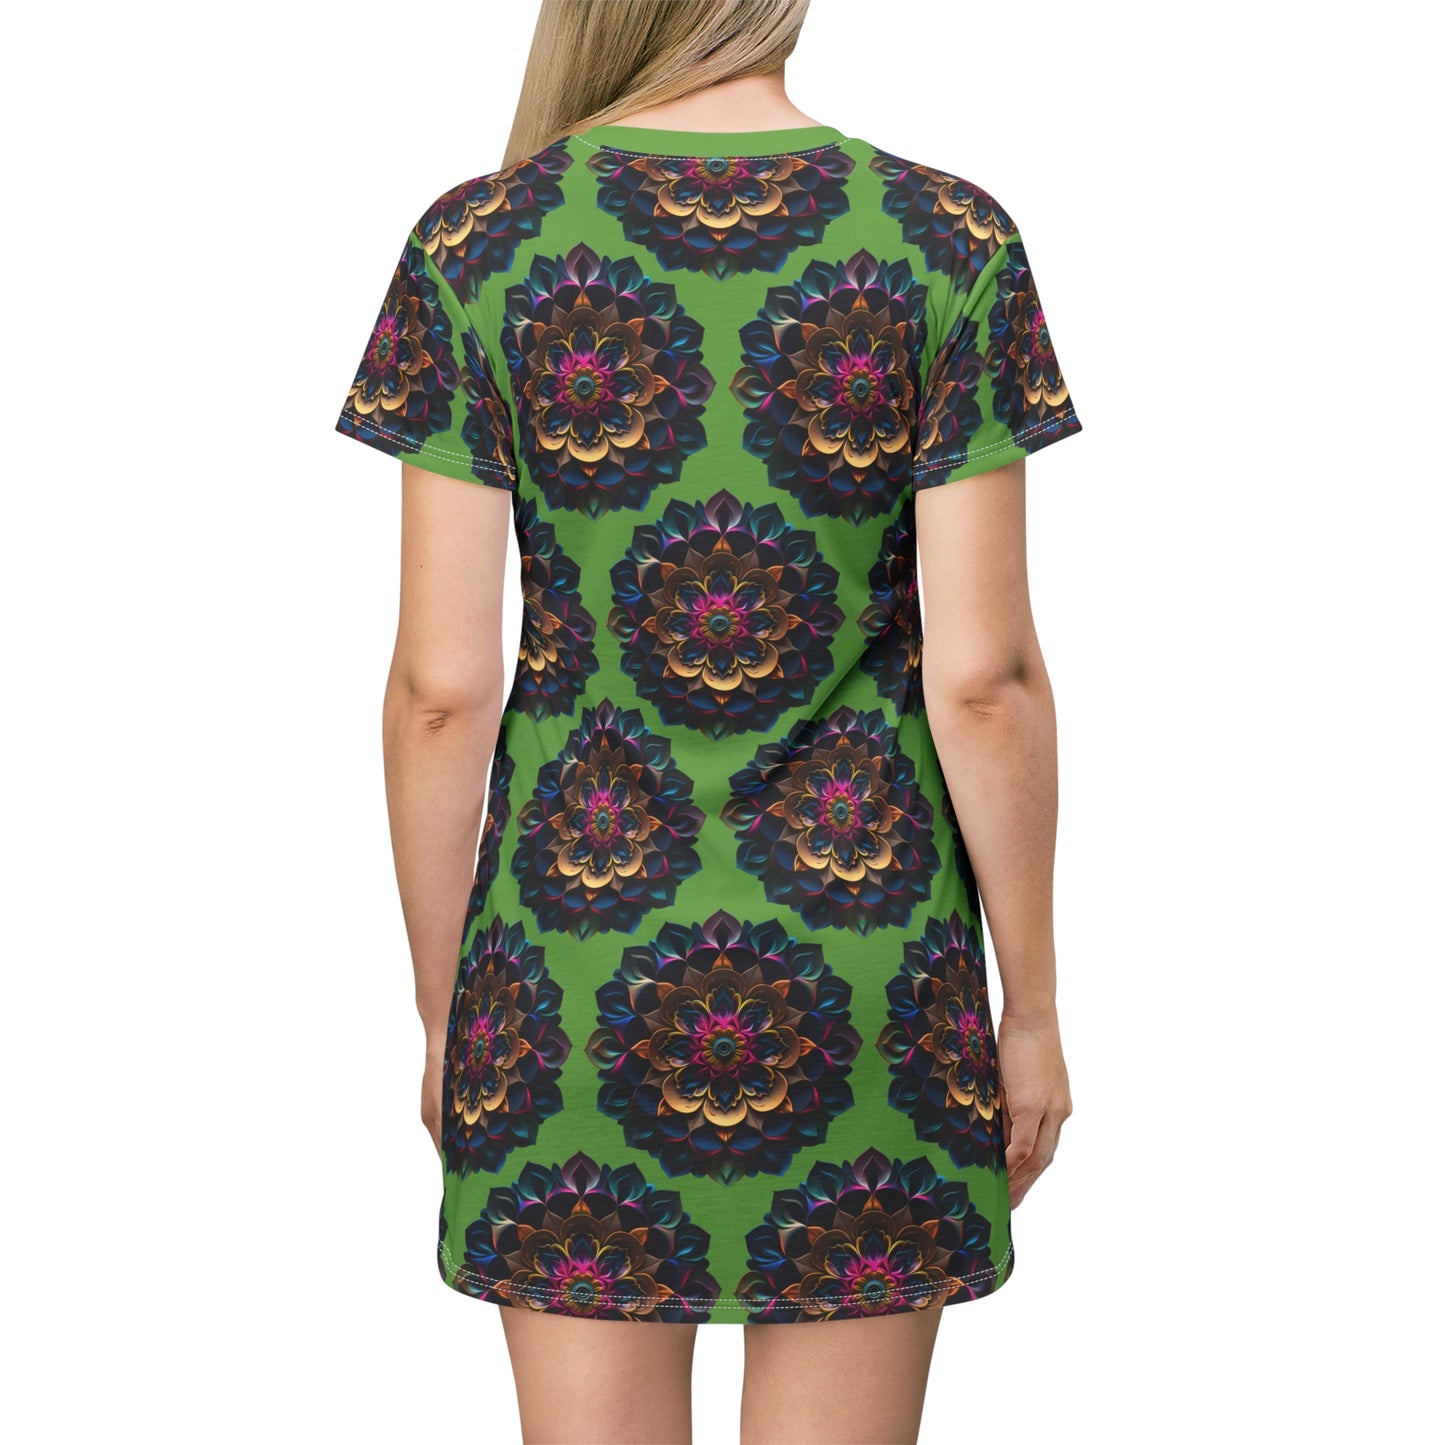 Green with Blue and Pink Medallions - T-Shirt Dress